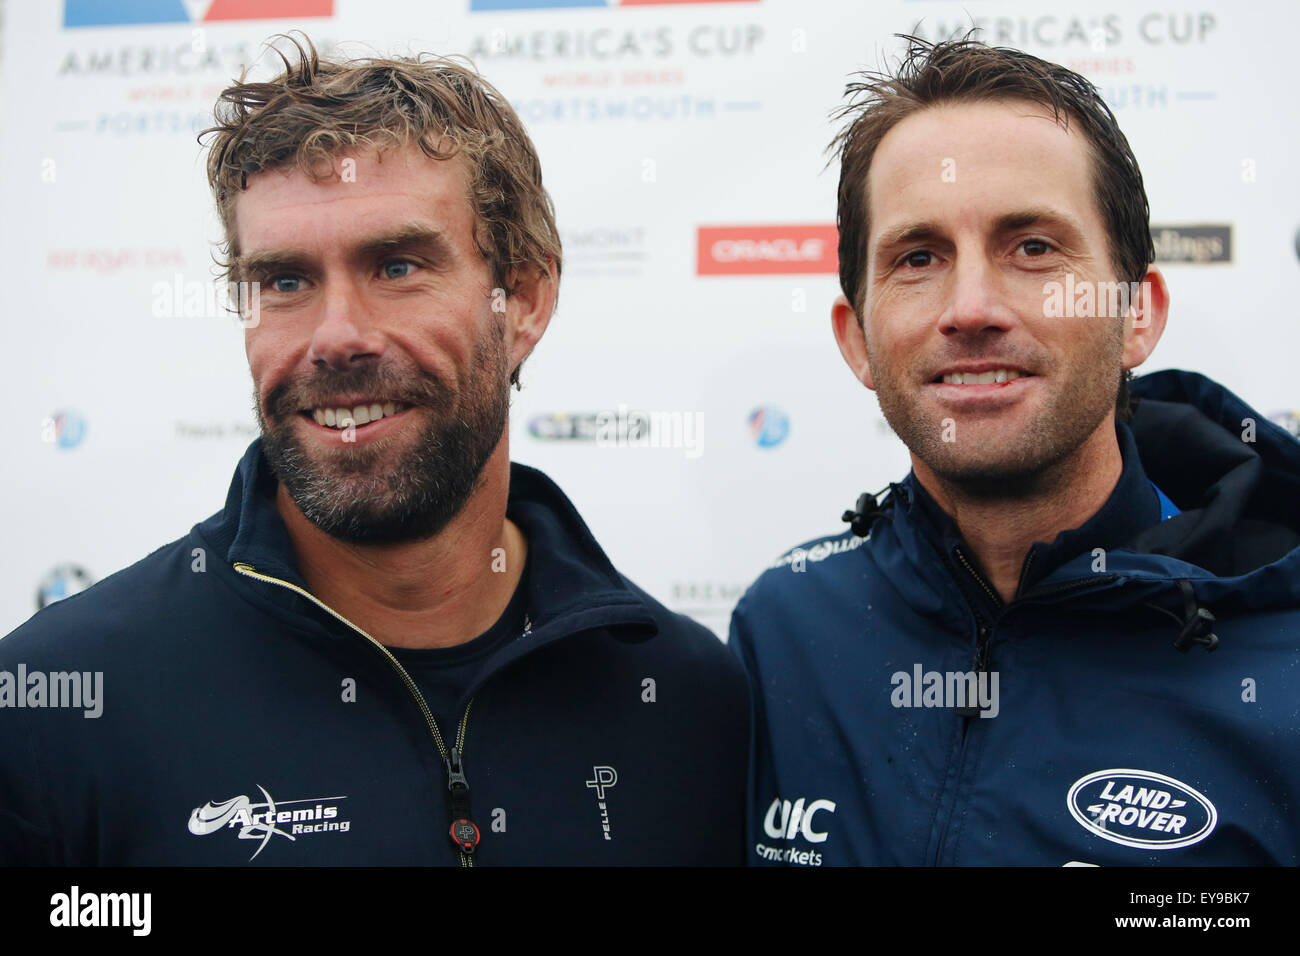 Portsmouth, UK. 24th July, 2015. Tactician Iain Percy of Sweden's Artemis Racing and Britain's Skipper Ben Ainslie of Land Rover BAR (Ben Ainslie Racing) speak to media after the practice racing ahead of the 35th America's Cup World Series Races at Portsmouth in Hampshire, UK Friday July 24, 2015. The 2015 Portsmouth racing of the Louis Vuitton America's Cup World Series counts towards the qualifiers and playoffs which determine the challenger to compete against the title holders Oracle Team USA in 2017. Credit:  Luke MacGregor/Alamy Live News Stock Photo